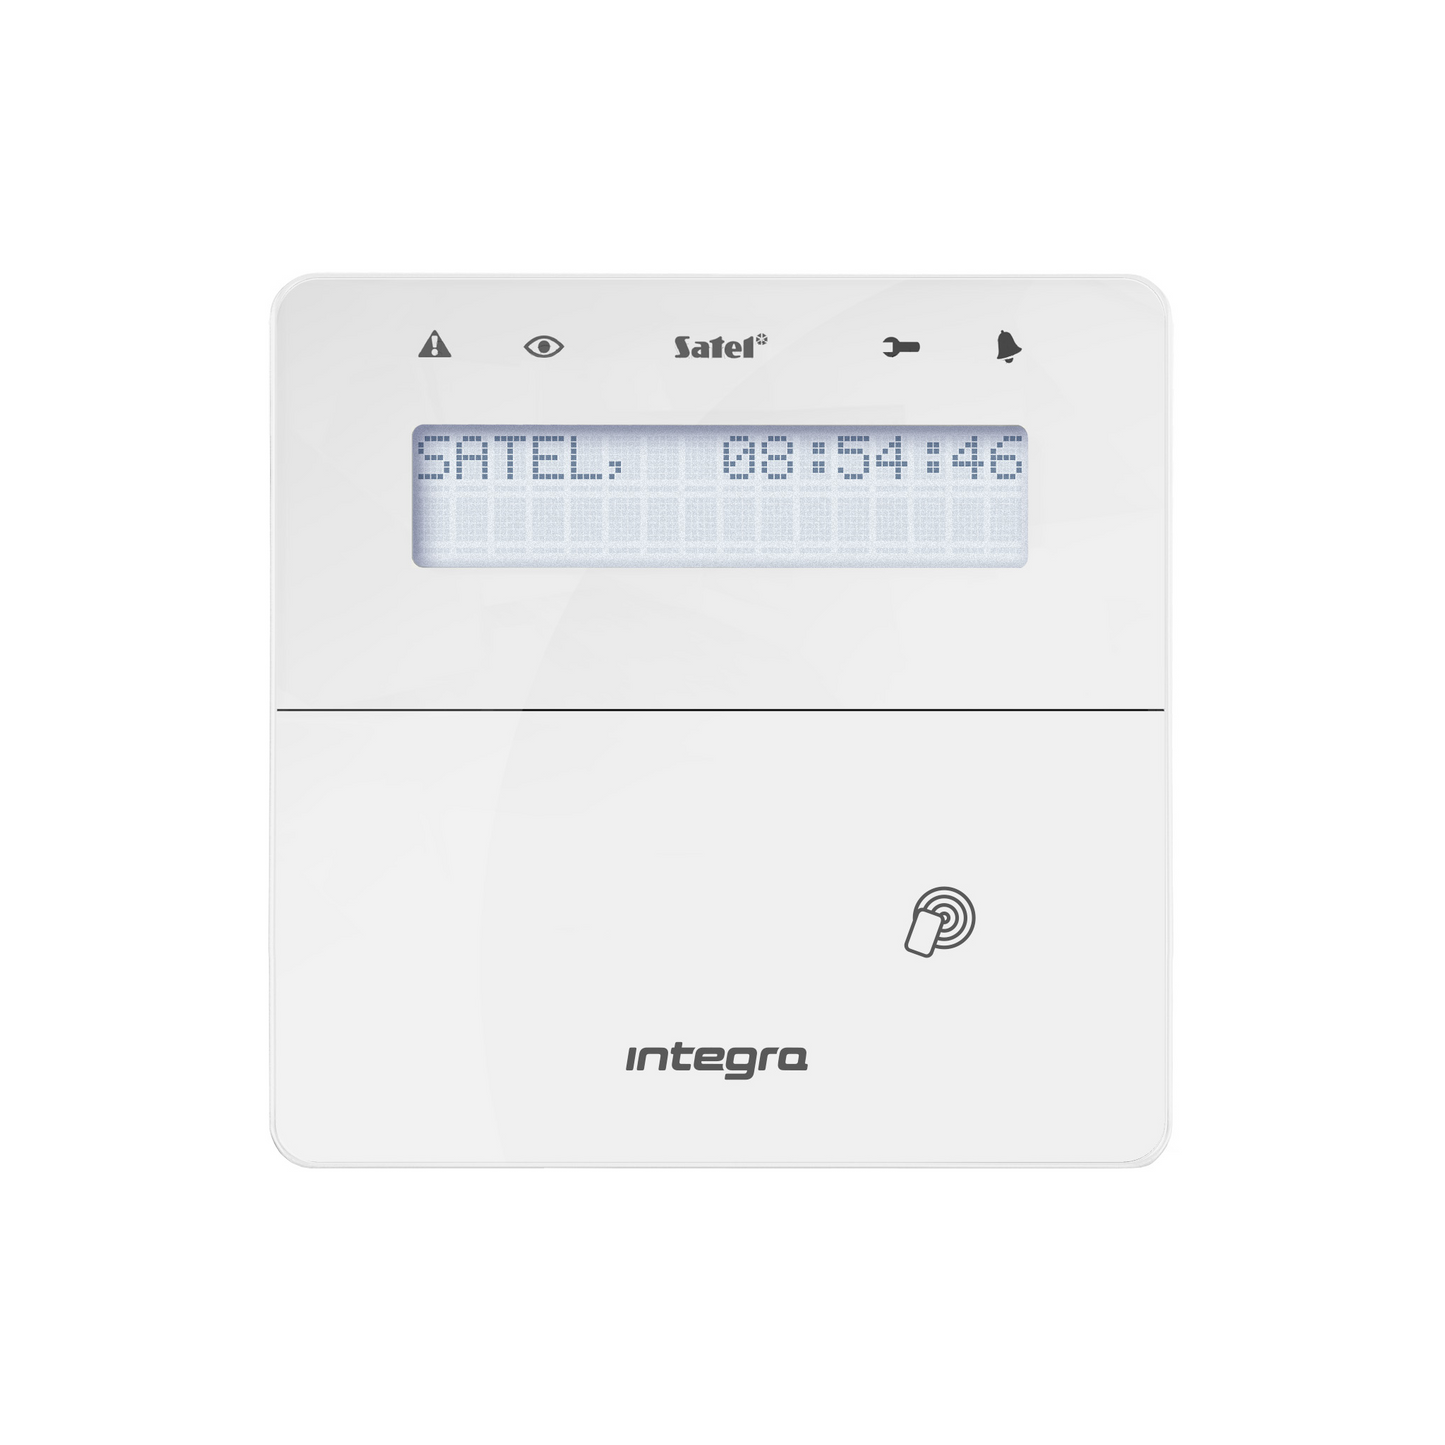 SATEL INT-KLFR-W Grade 3 LCD Keypad with prox reader (White)